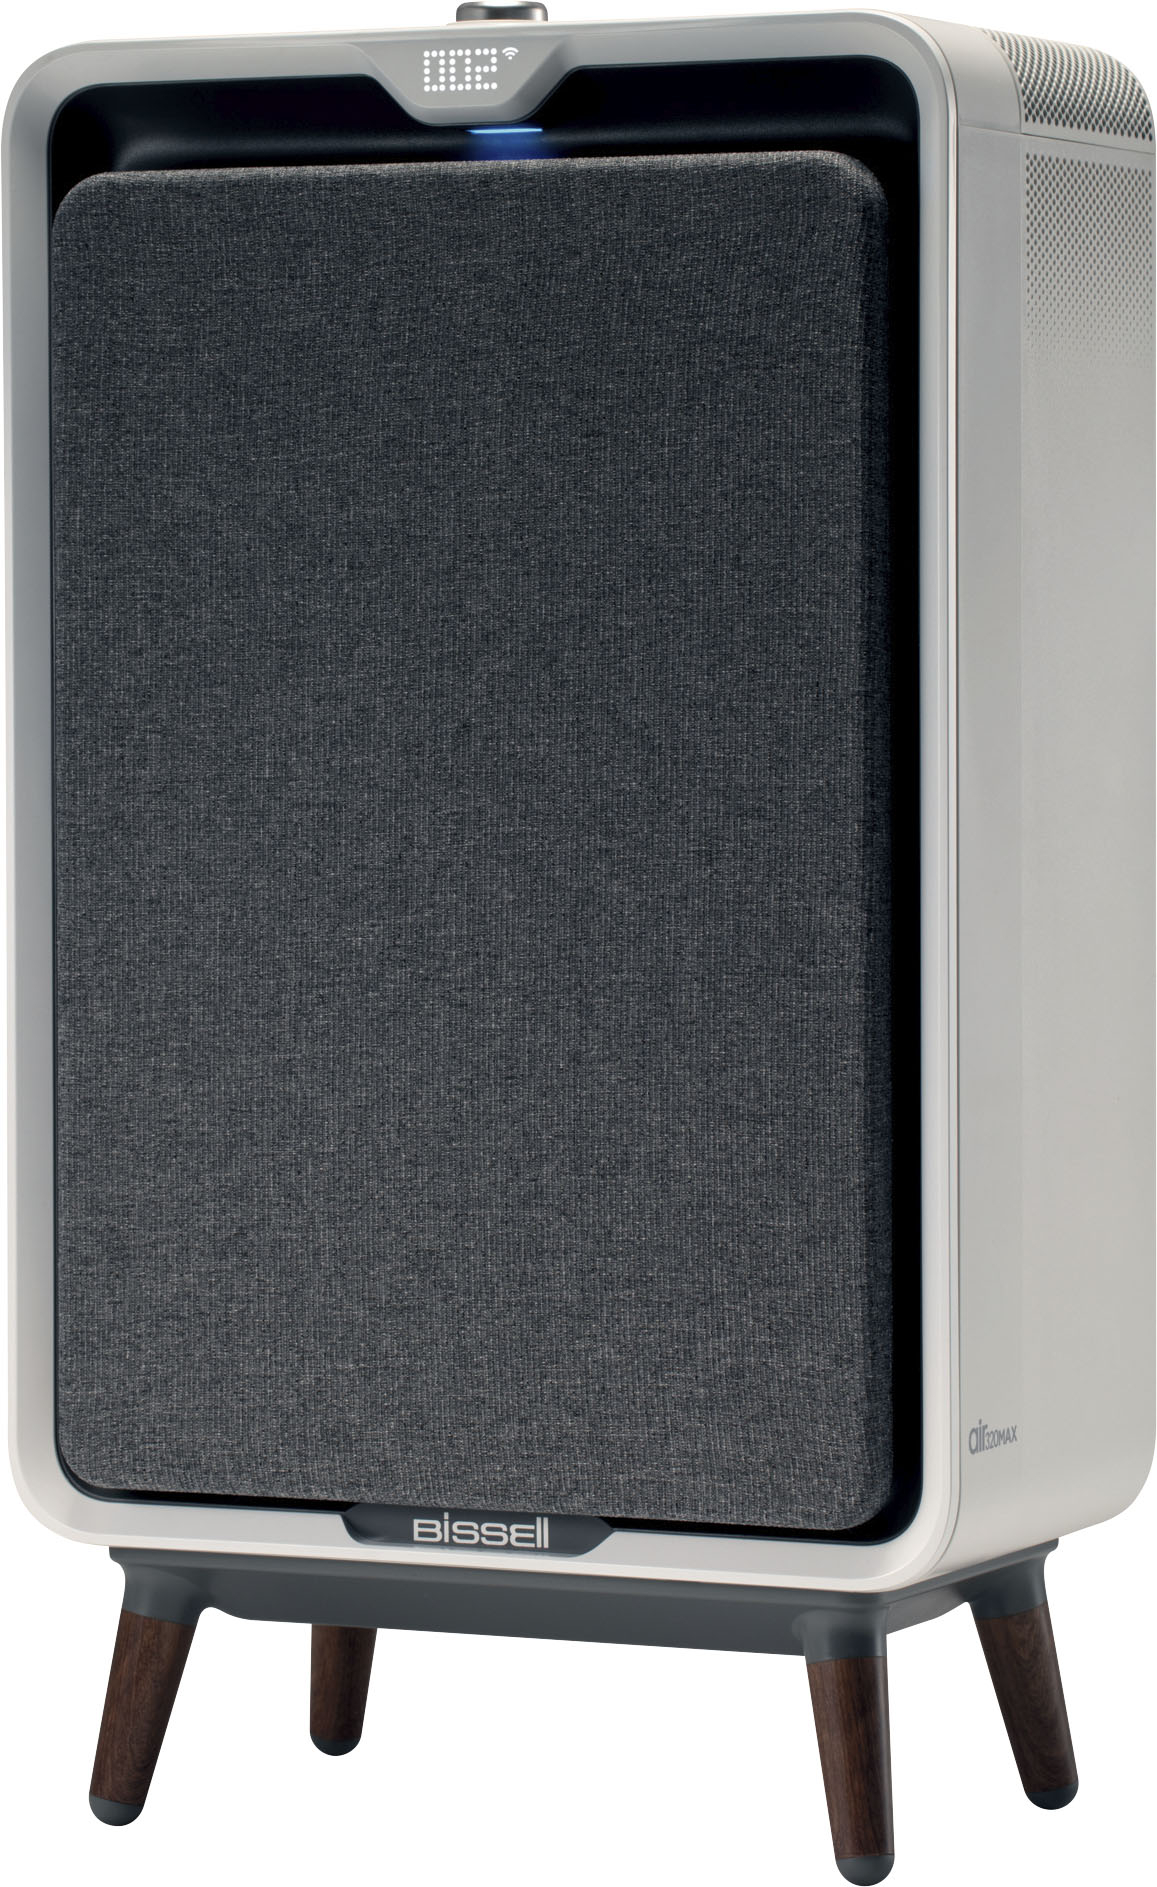 BISSELL air320 Max Smart WiFi Air Purifier – Gray